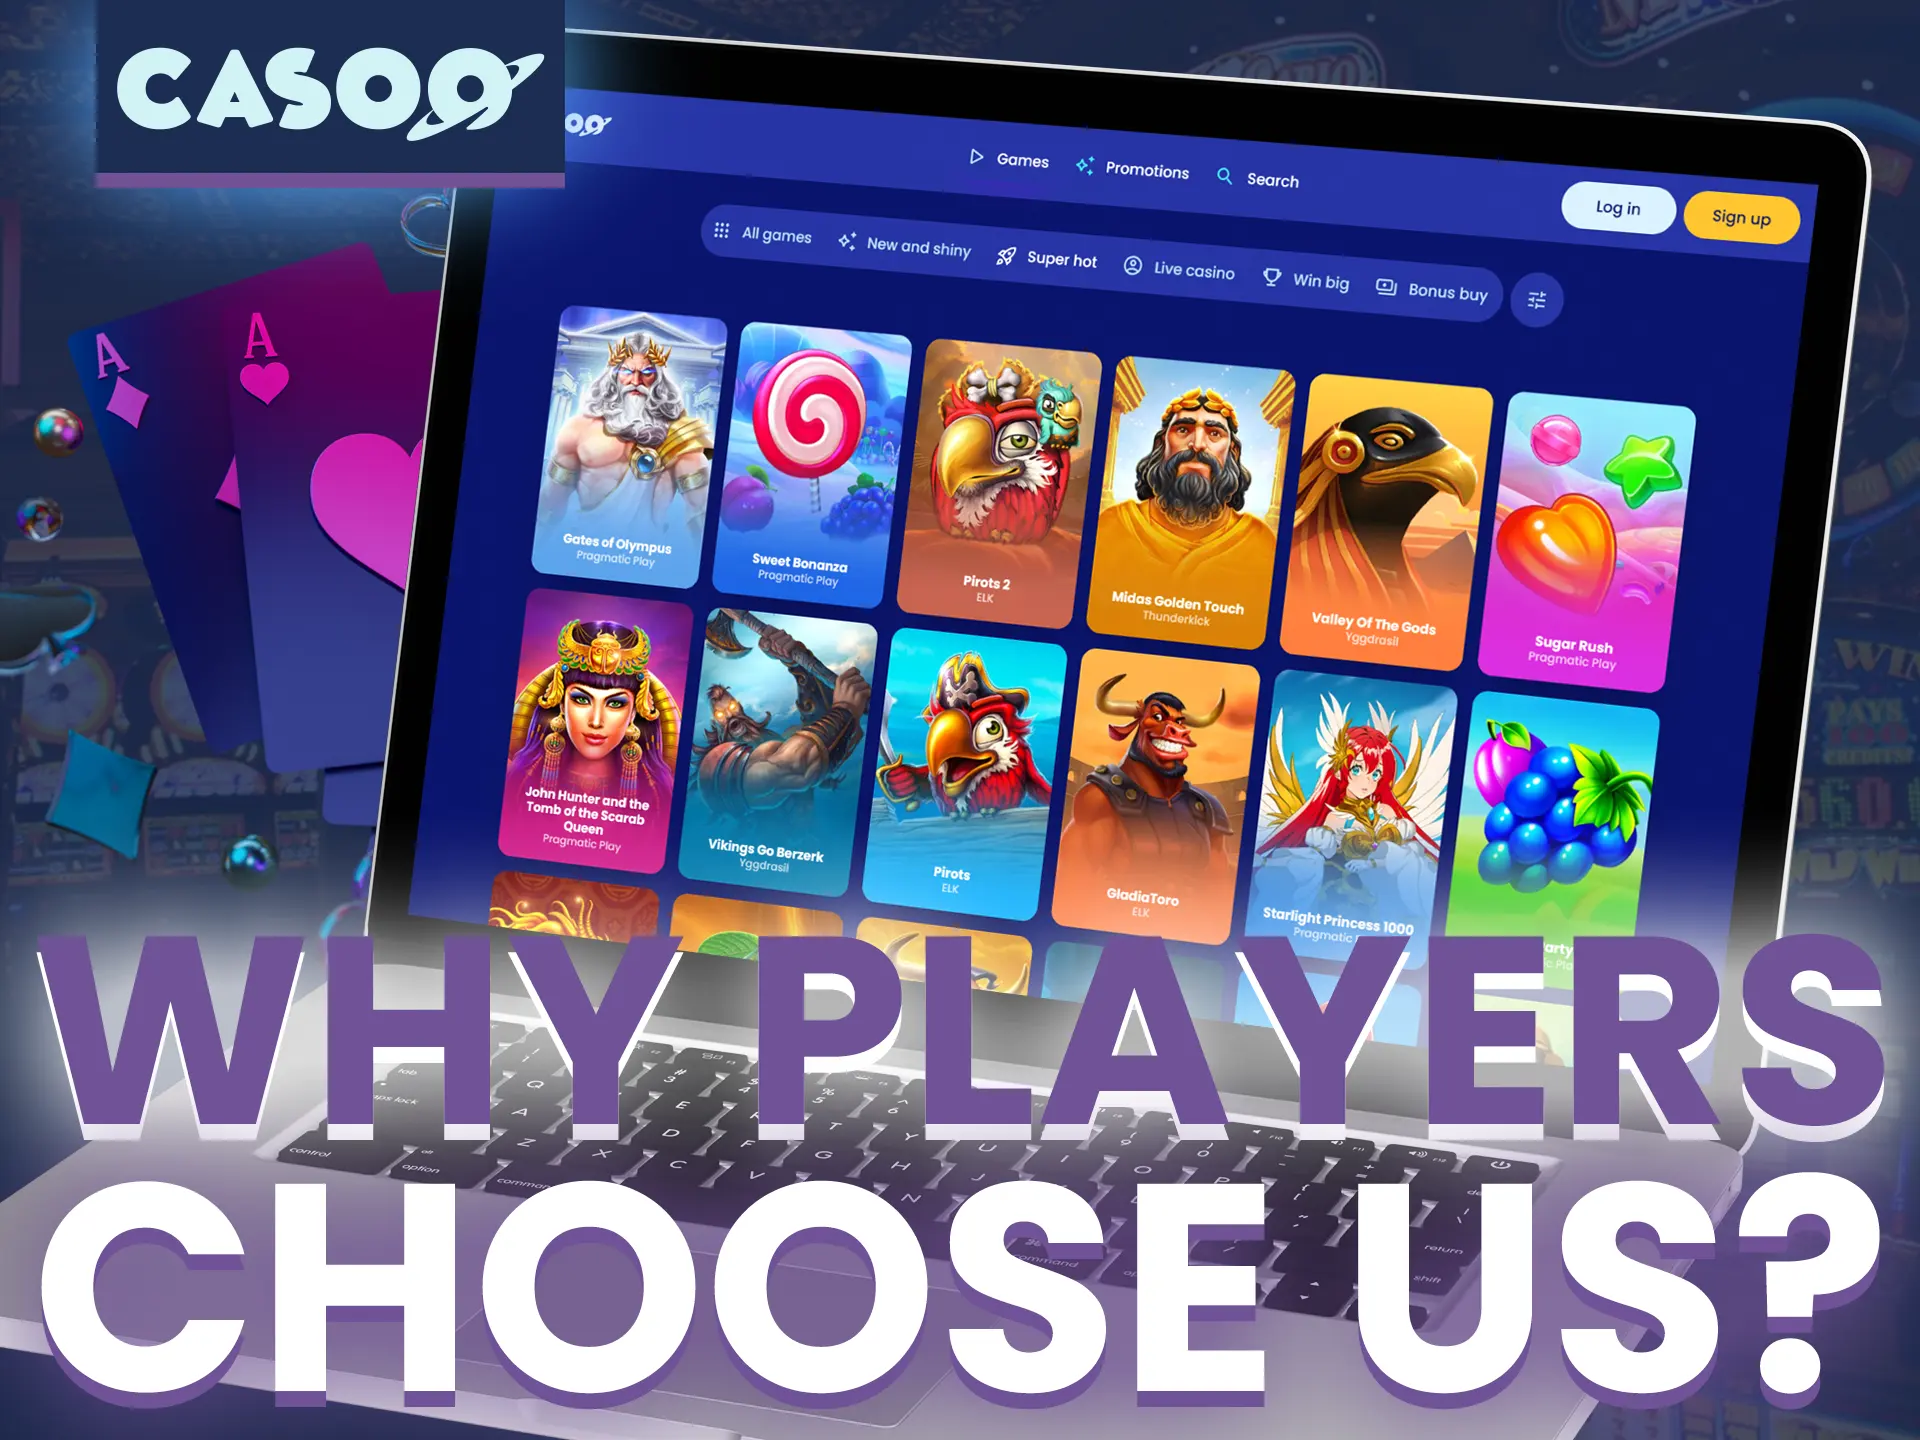 Users from Australia choose Casoo Casino due to several advantages.